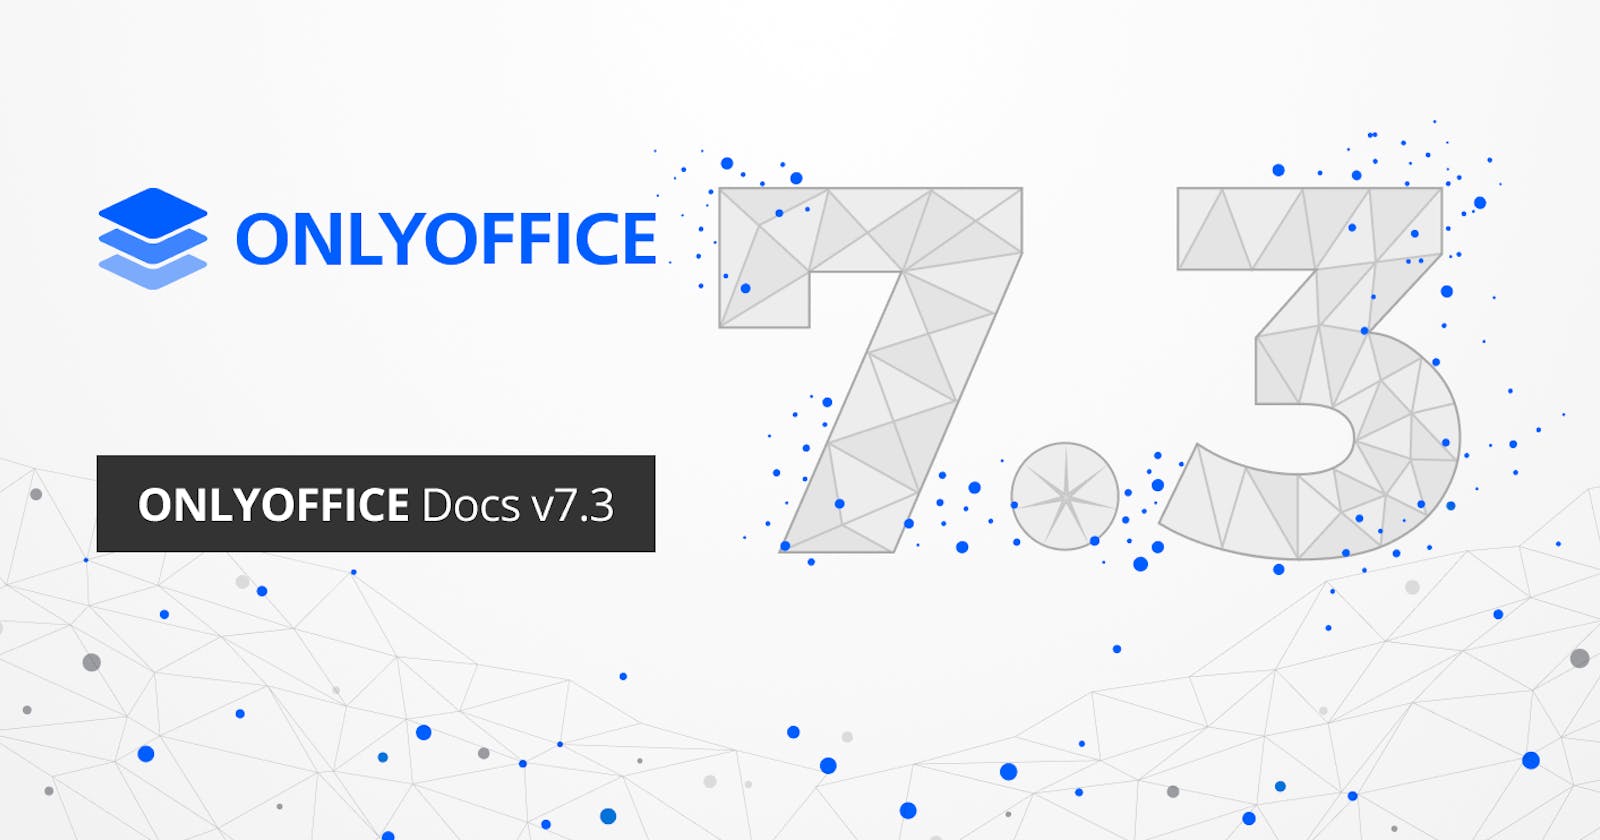 ONLYOFFICE Docs 7.3 released